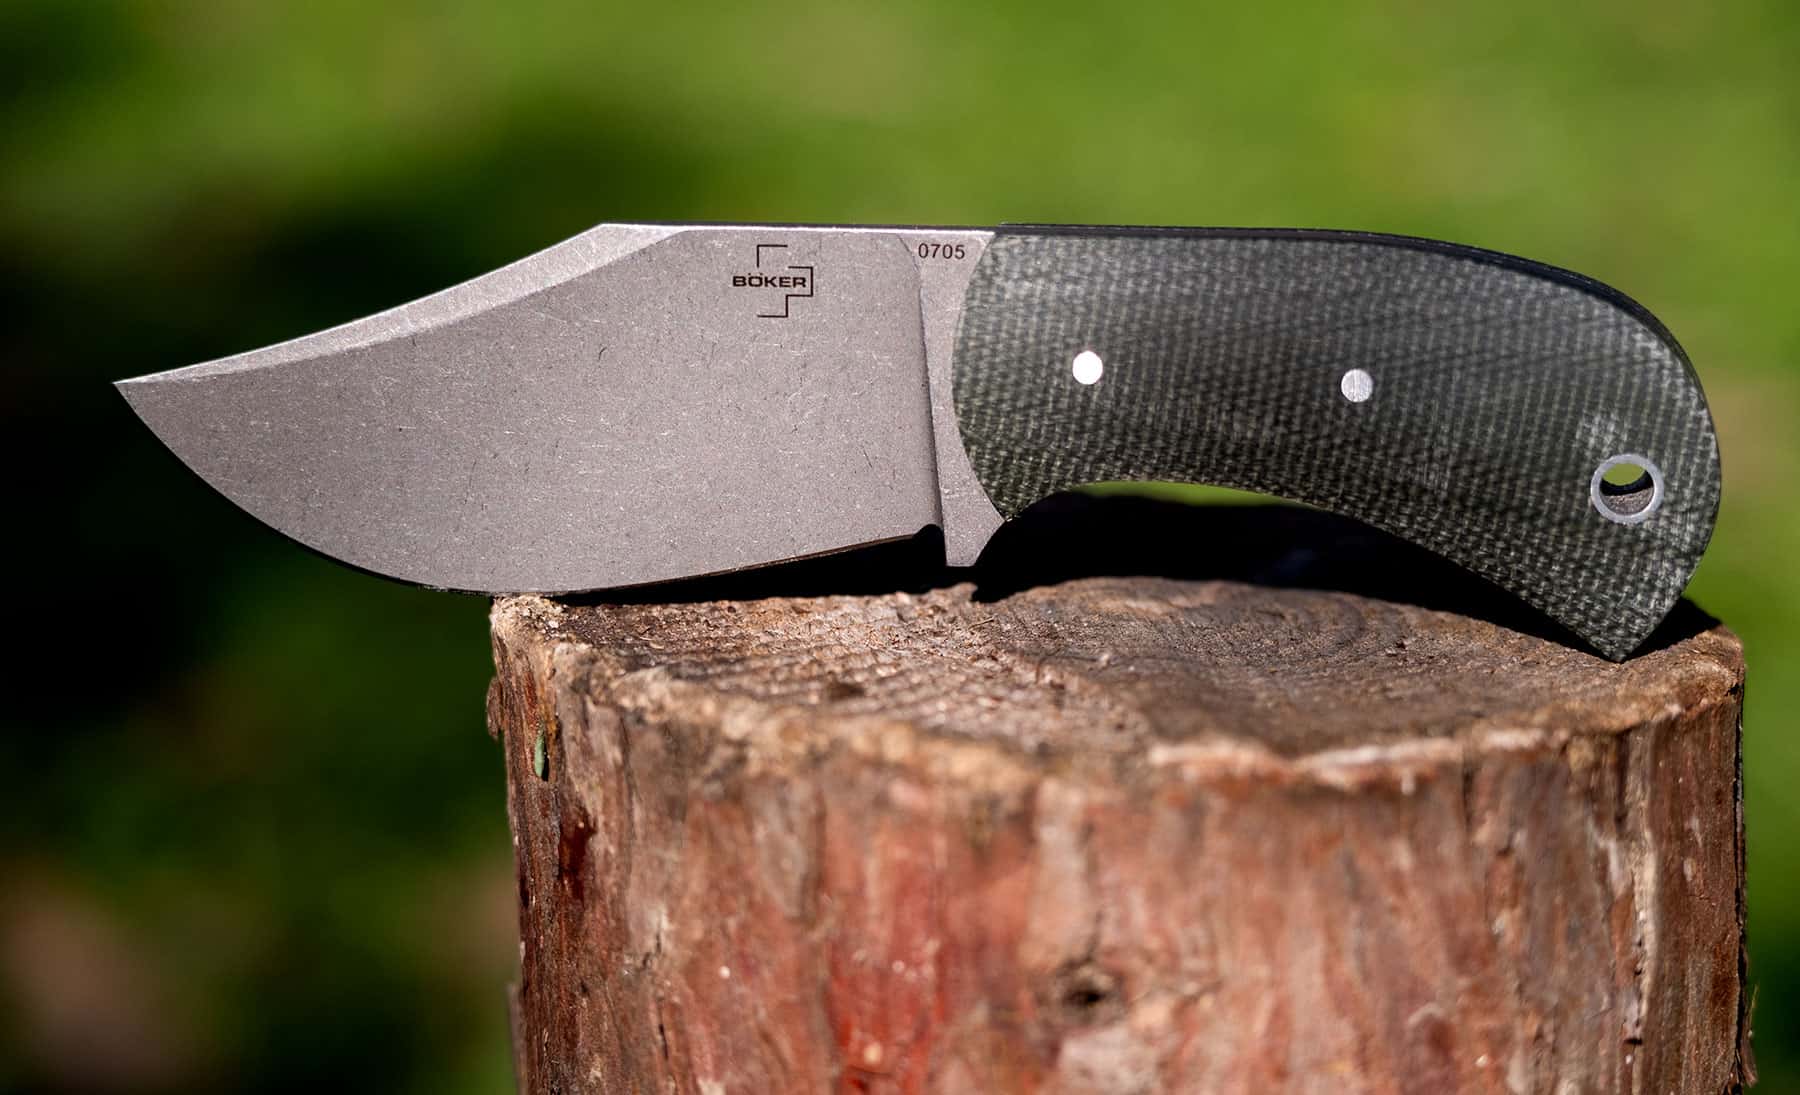 Boker Madman fixed blade knife outdoors on a piece of firewood to show the size and design.